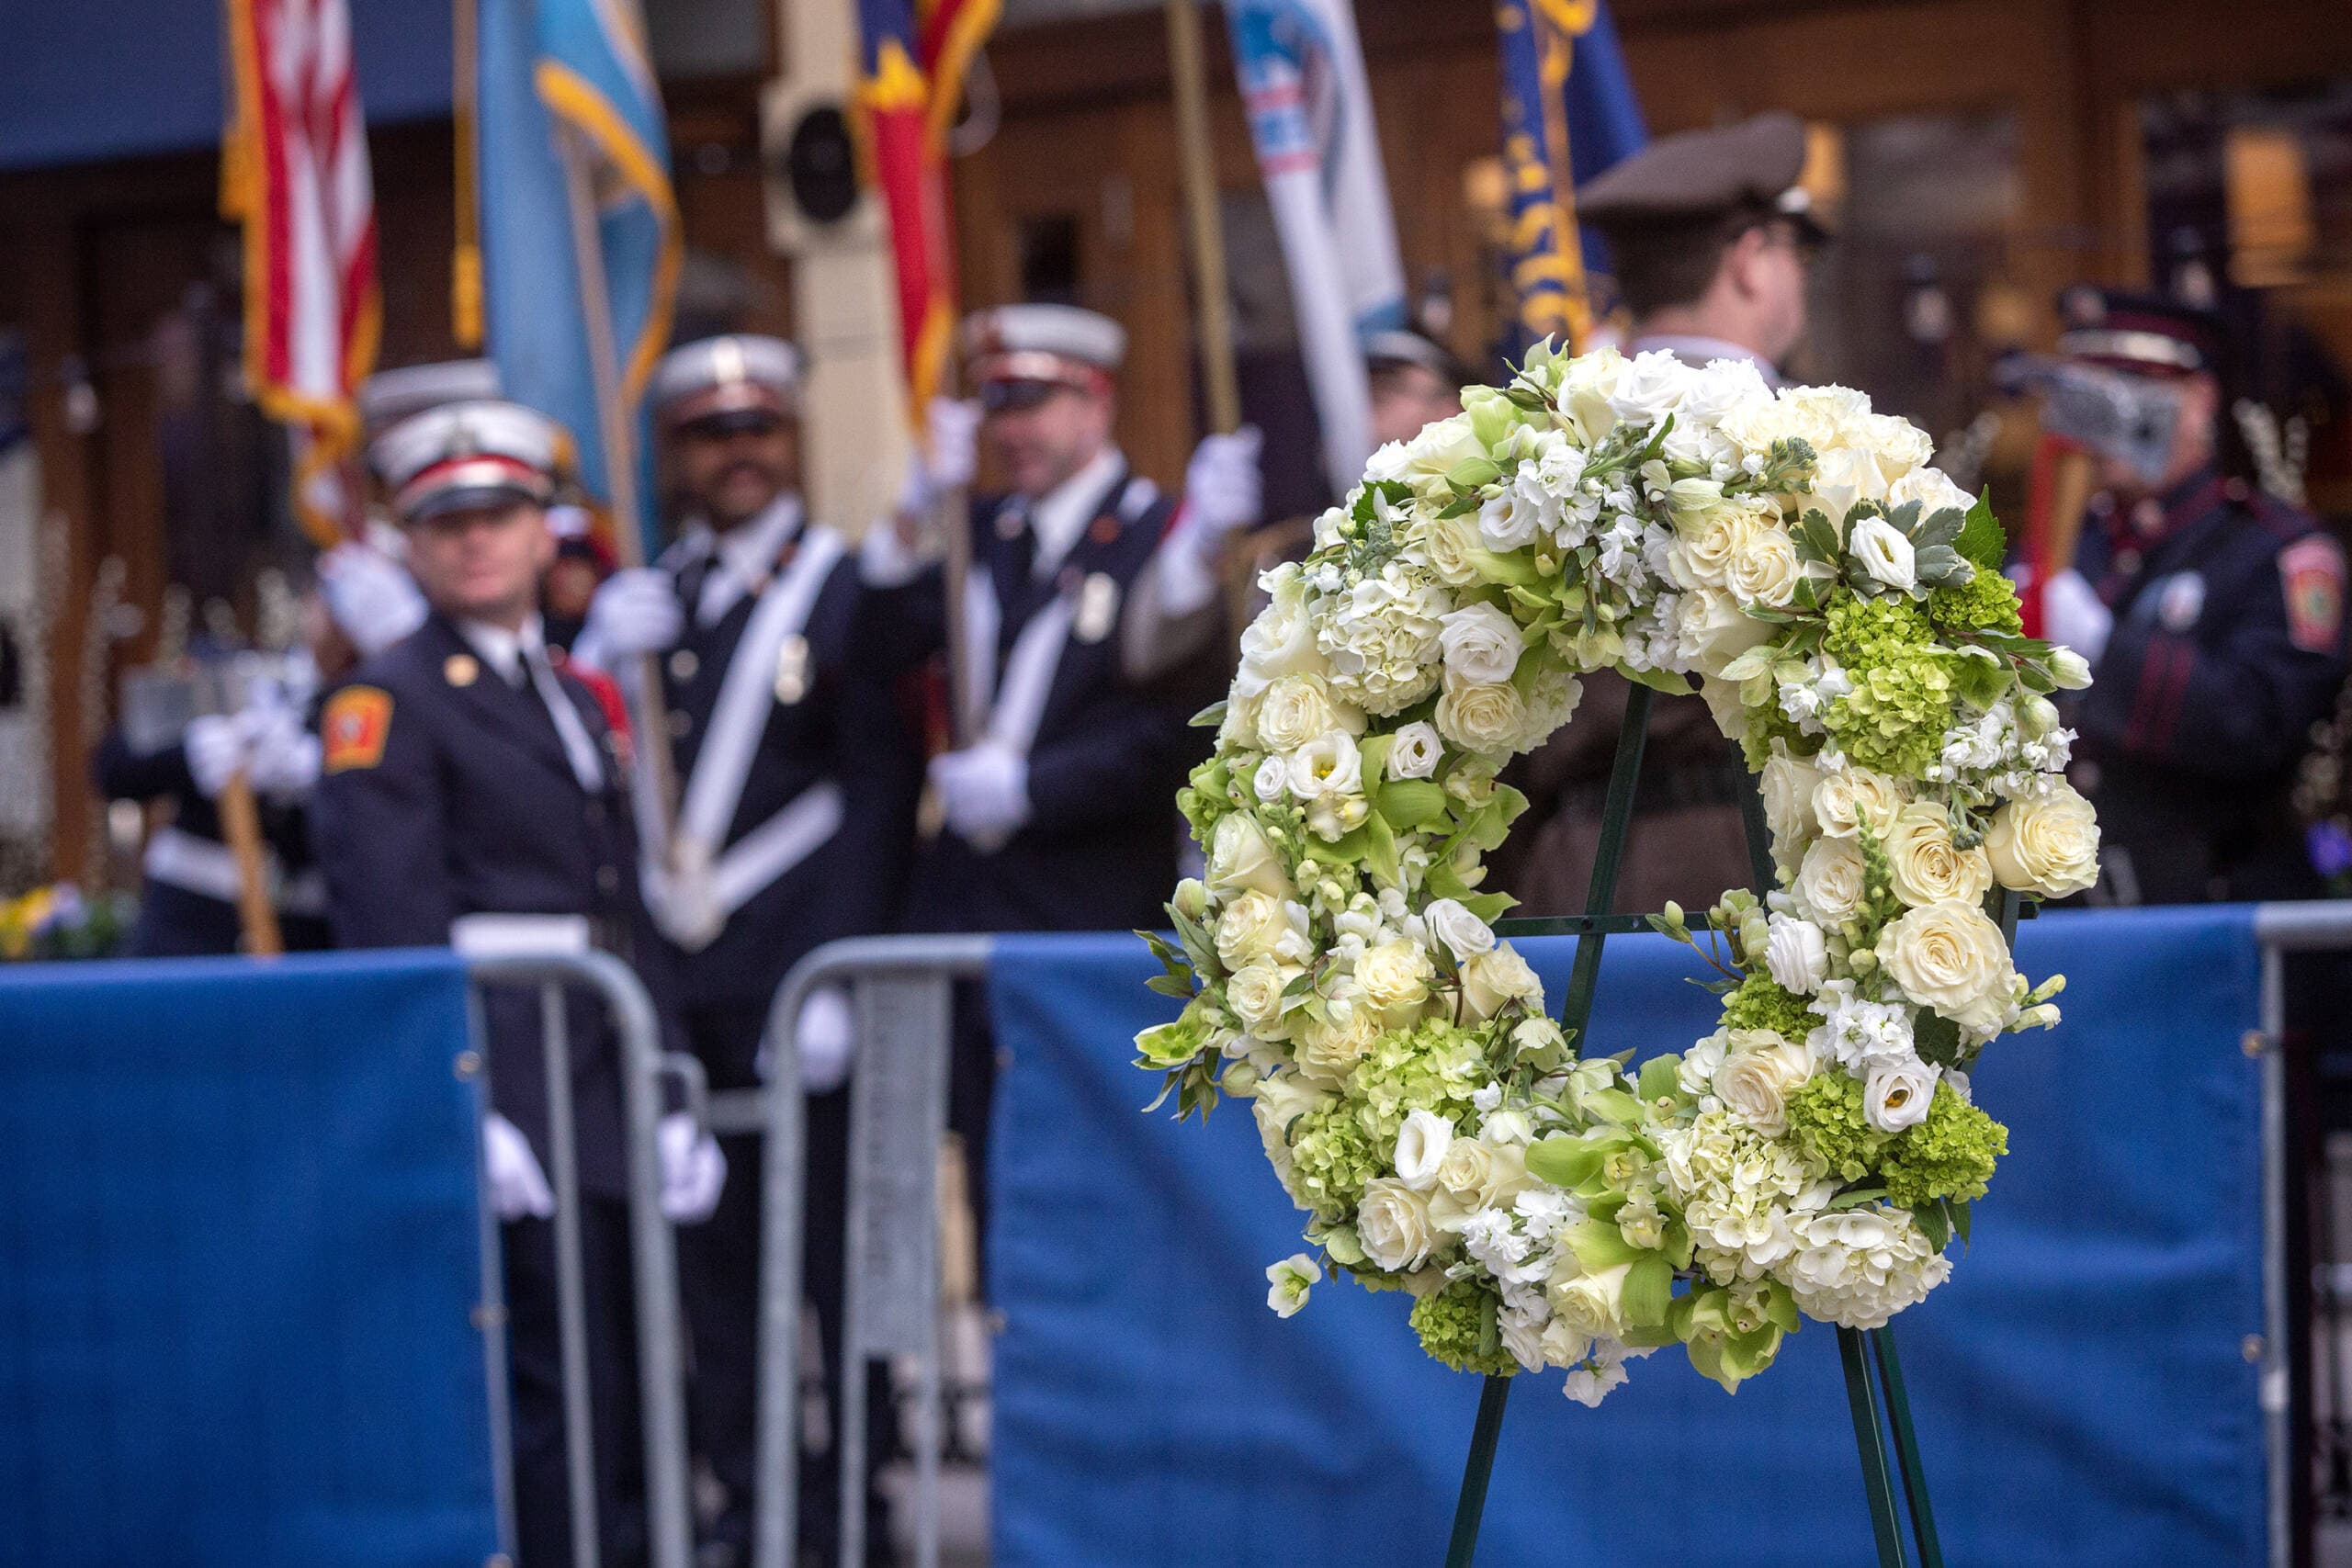 A memorial wreath on Boylston Street for a remembrance on the 10th anniversary of the 2013 Boston Marathon bombing. (Robin Lubbock/WBUR)